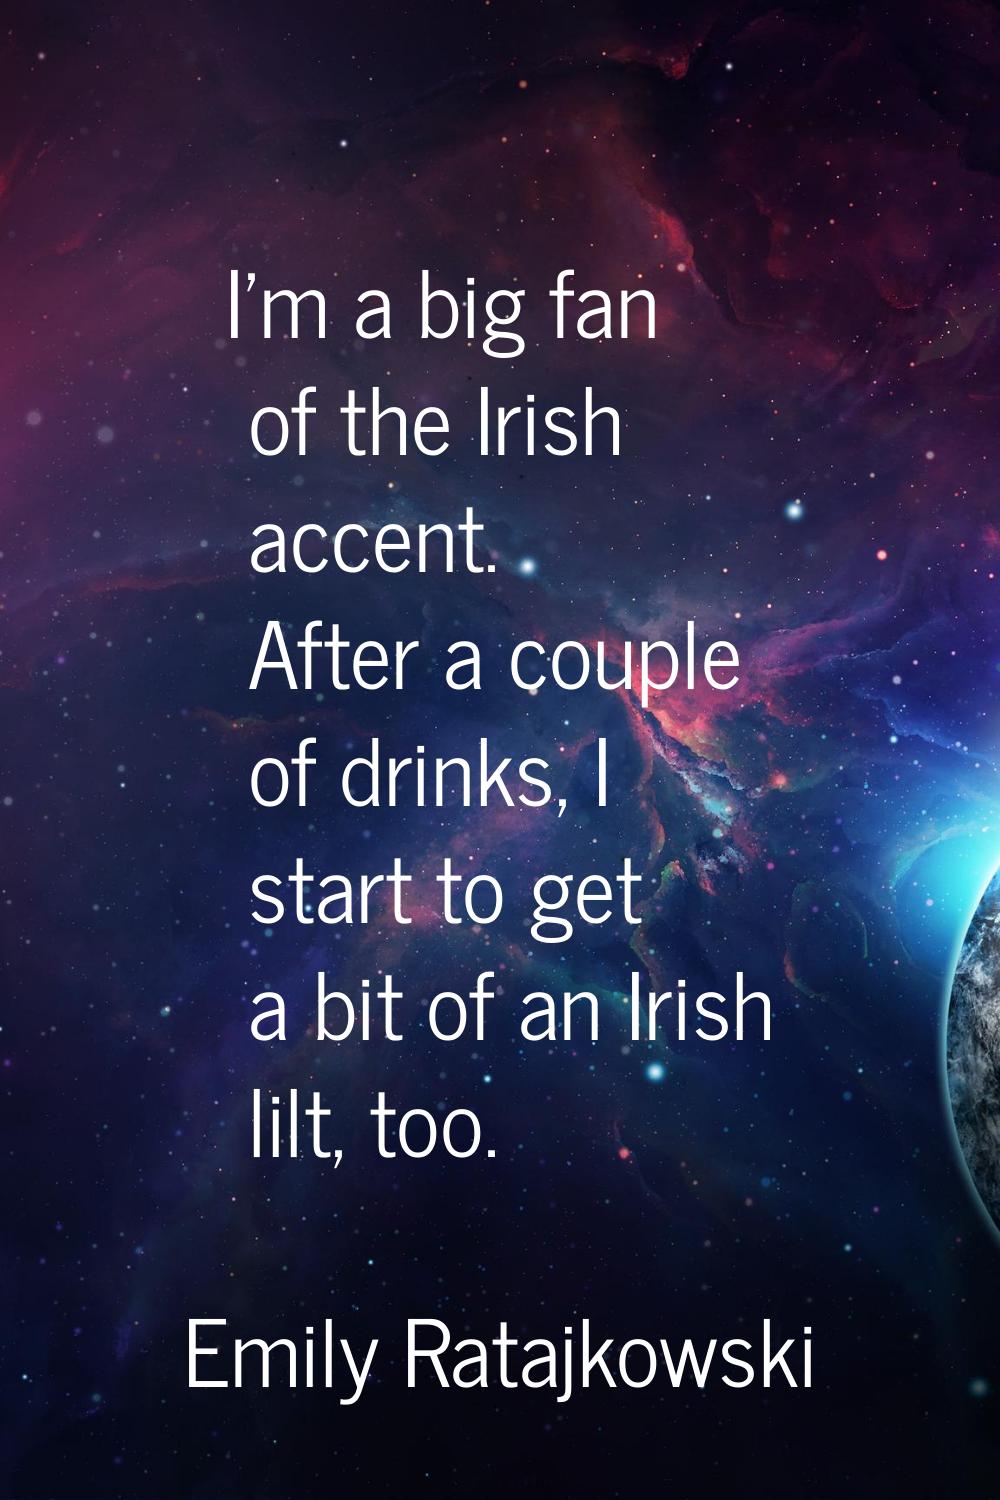 I'm a big fan of the Irish accent. After a couple of drinks, I start to get a bit of an Irish lilt,